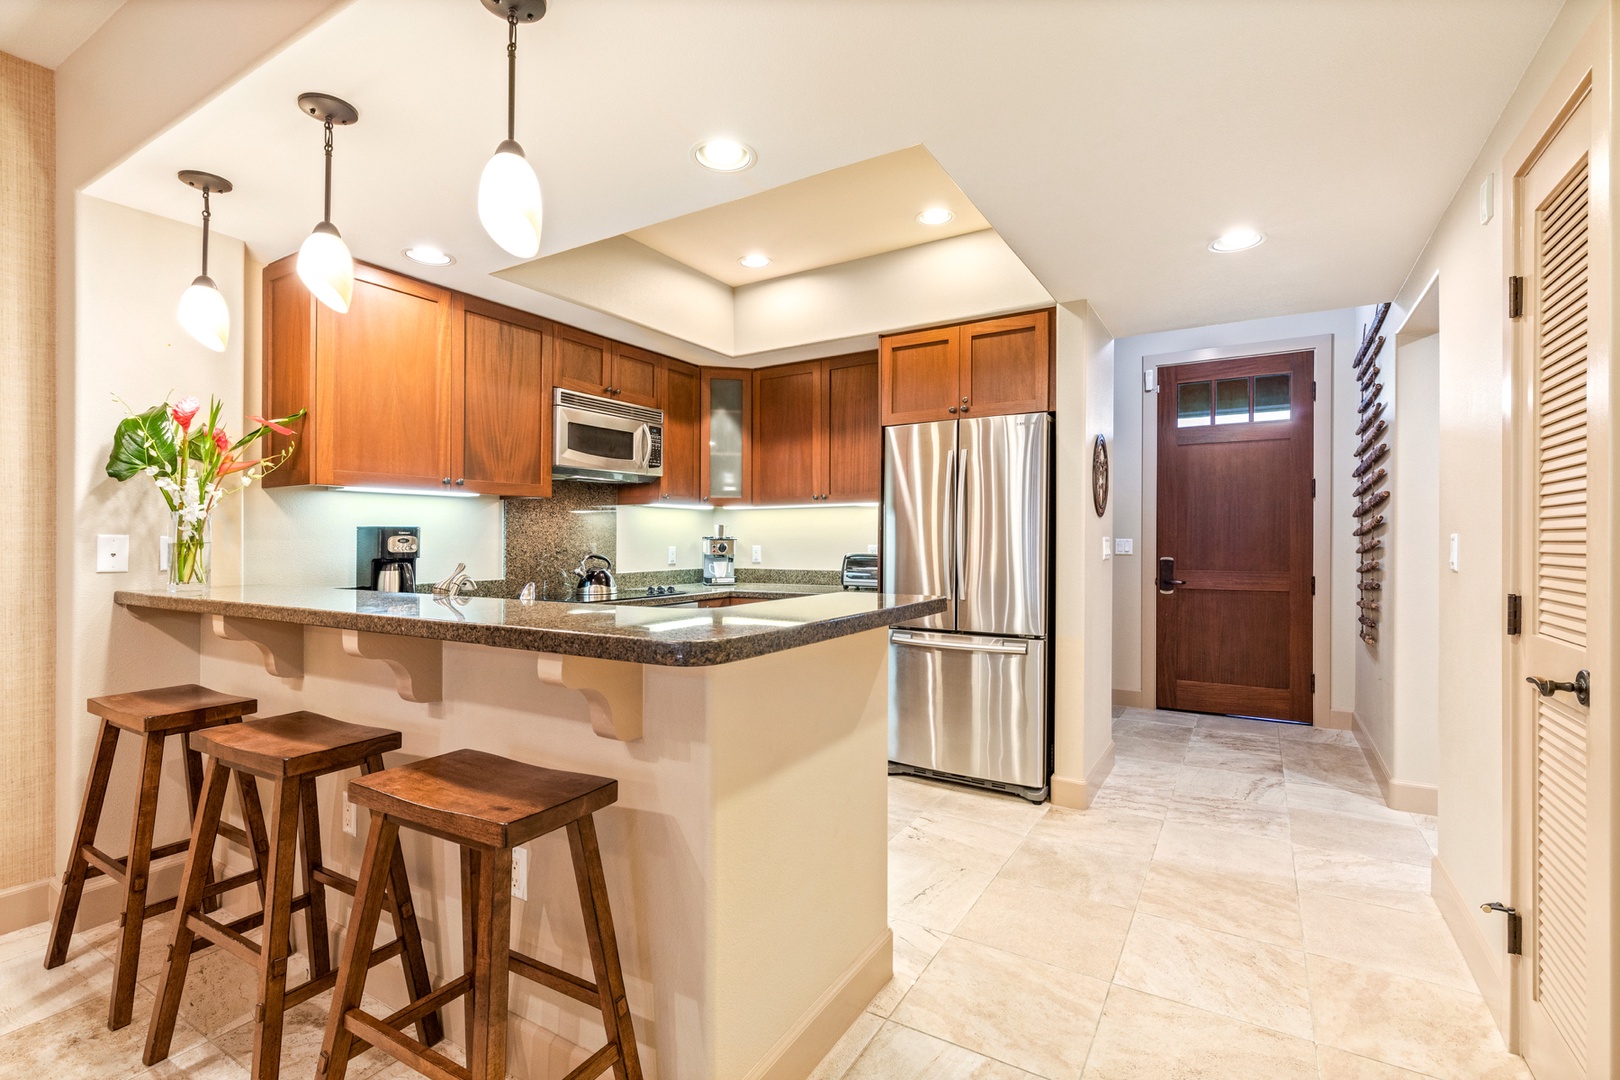 Waikoloa Vacation Rentals, 2BD Hali'i Kai 12C at Waikoloa Resort - Wide view of open concept gourmet kitchen with granite countertops, stainless steel appliances and bar seating.